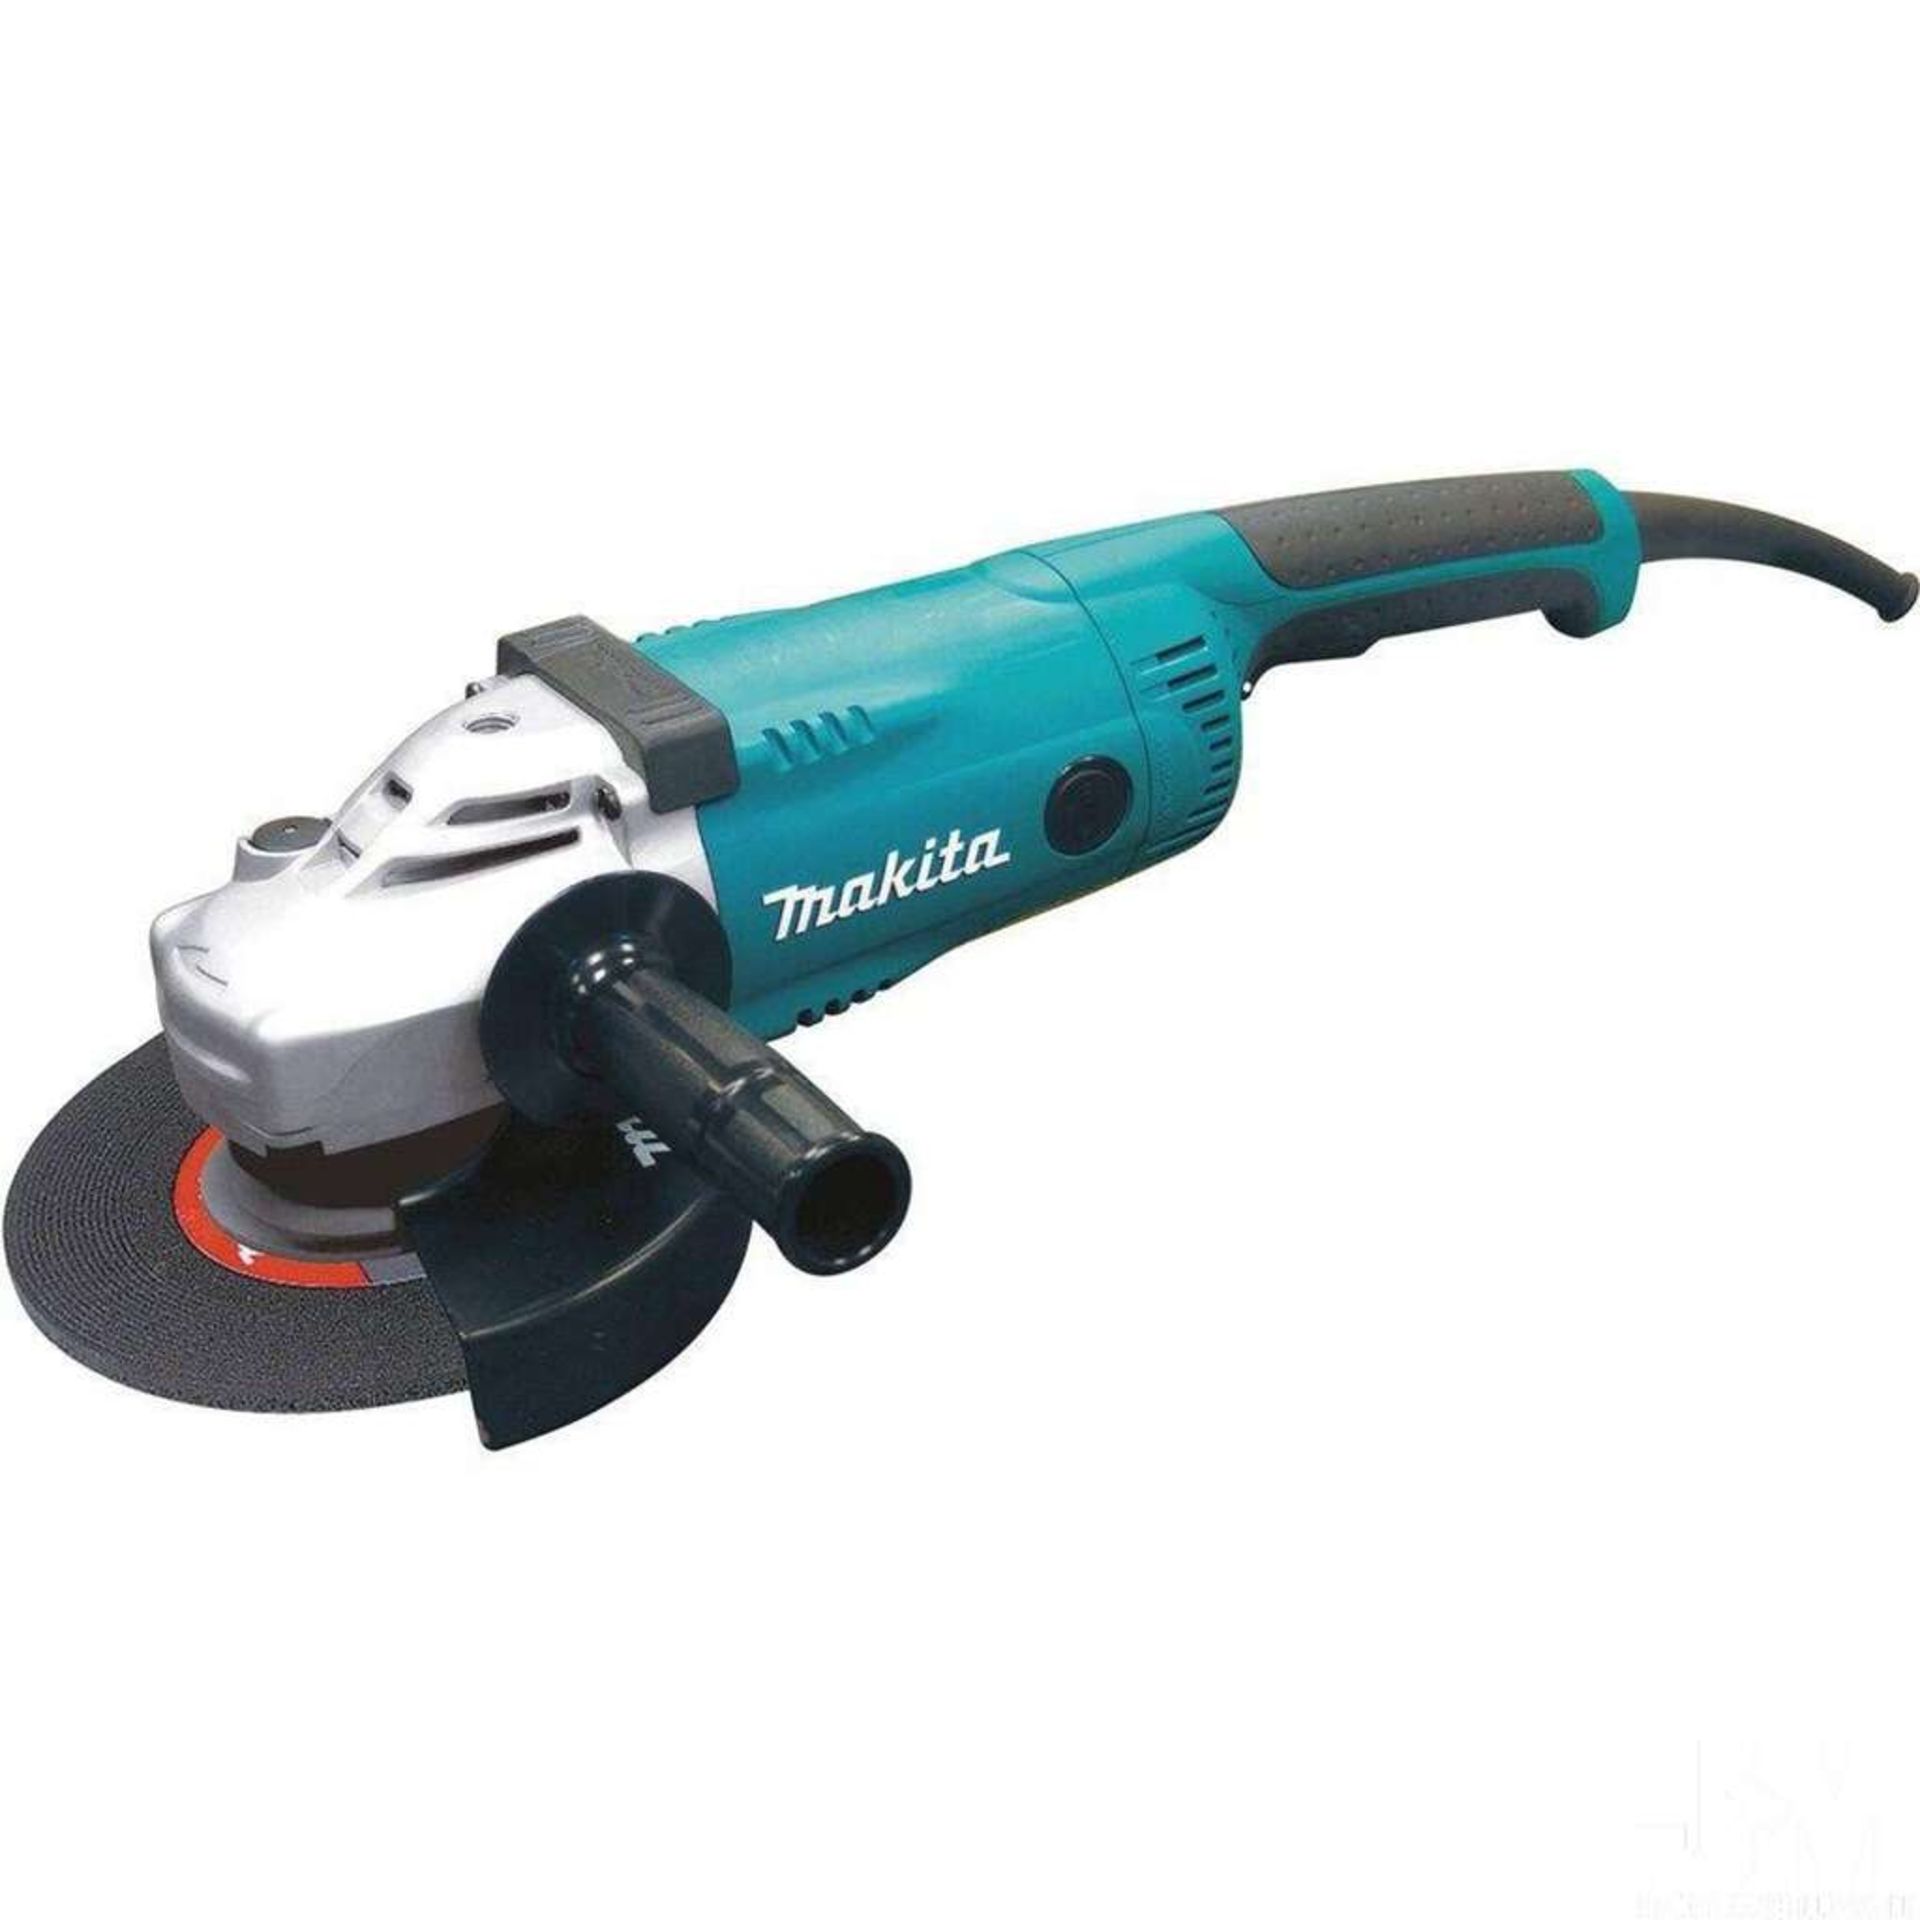 7" ANGLE GRINDER , WITH AC/DC SWITCH (RECON)- GA7021 -